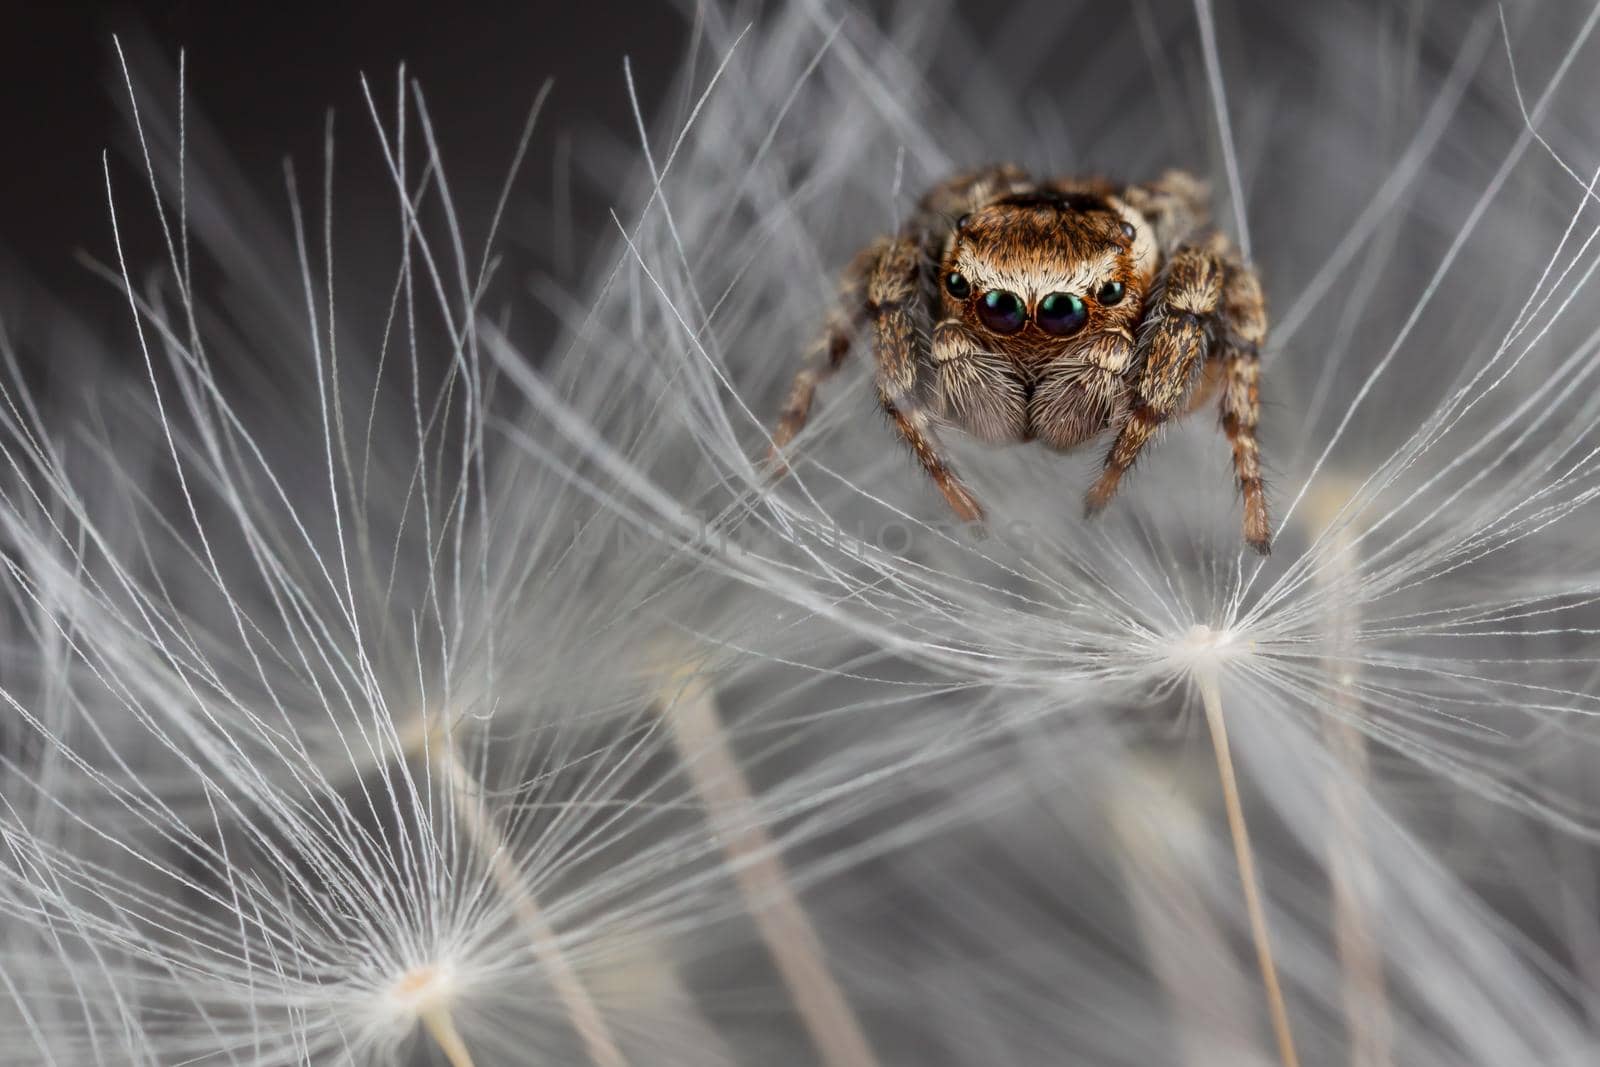 Jumping spider and dandelion fluff by Lincikas